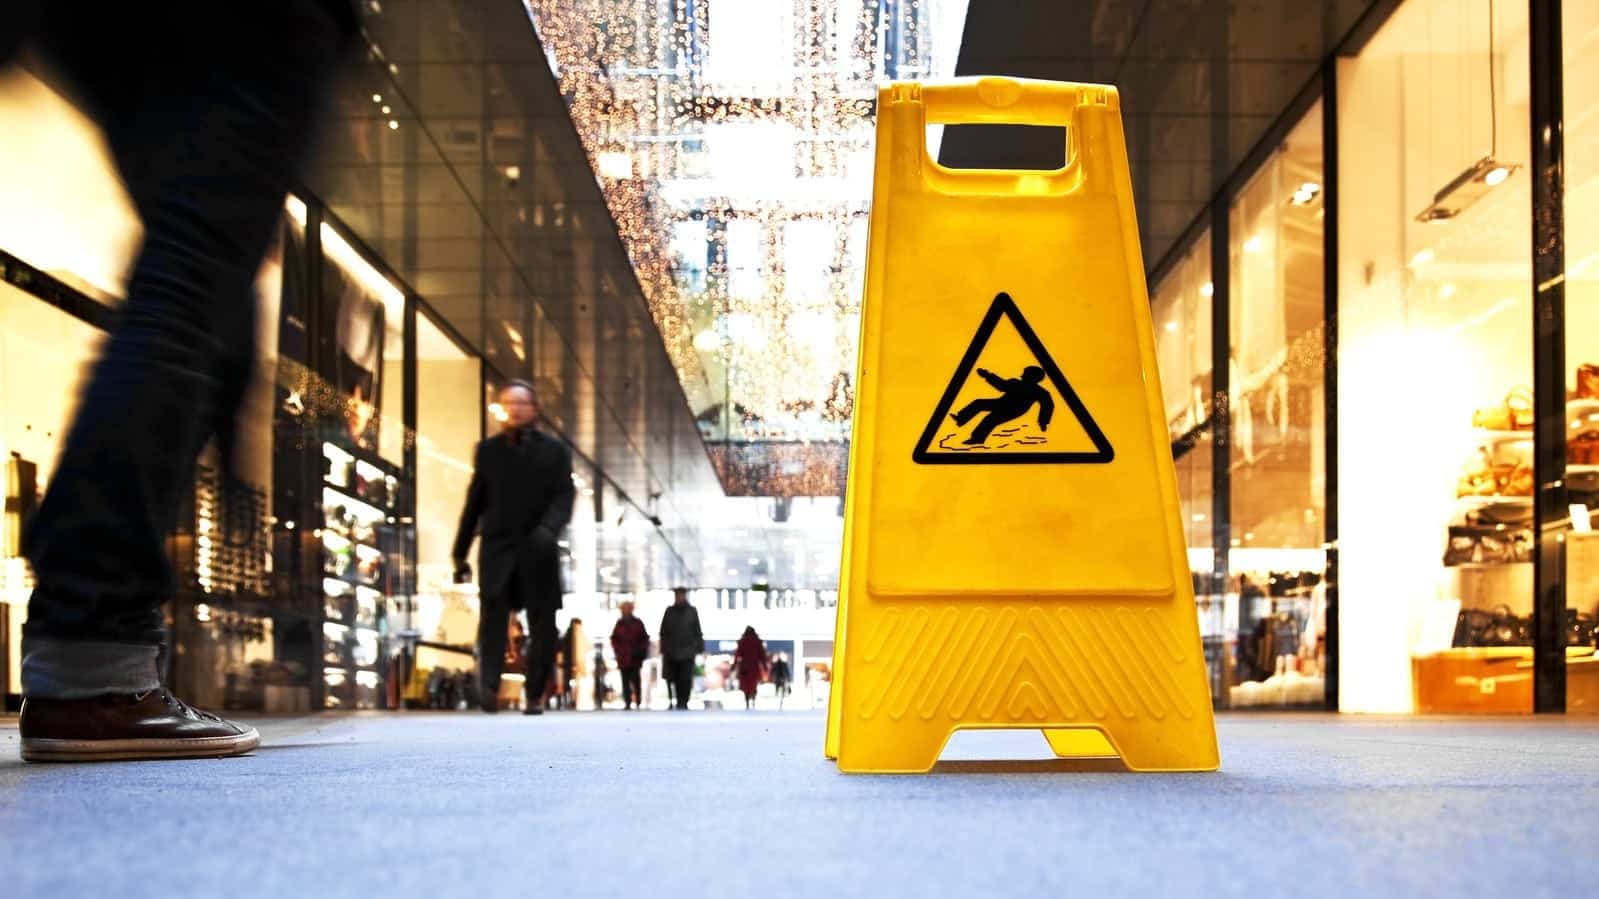 Danger sign in a shopping mall, in the background are motion blurred people.